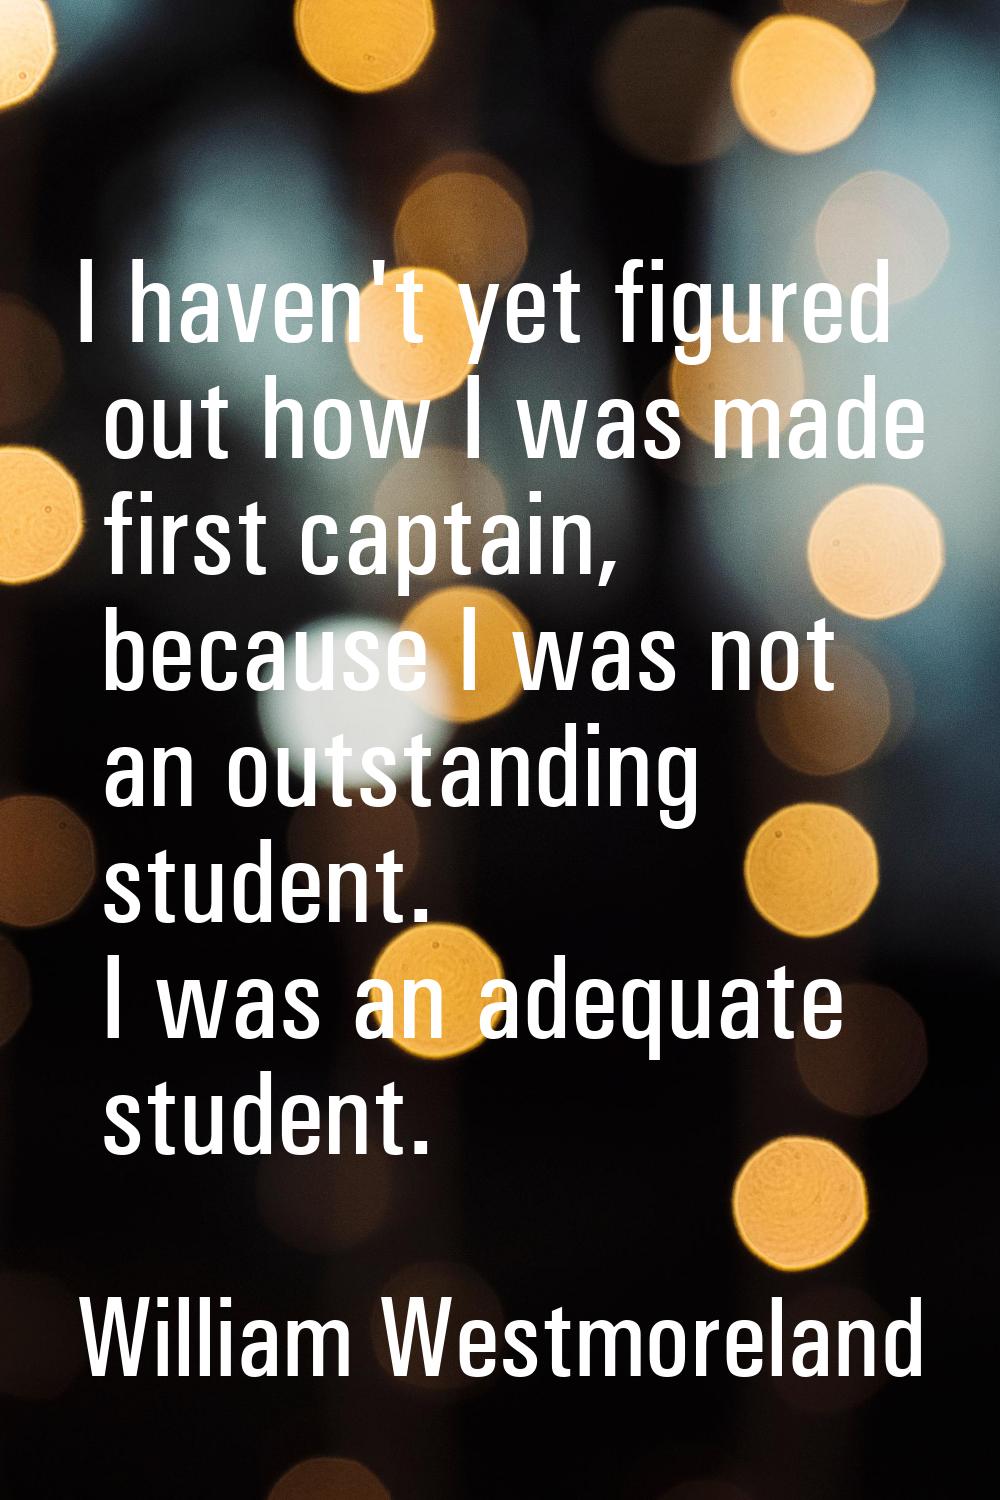 I haven't yet figured out how I was made first captain, because I was not an outstanding student. I